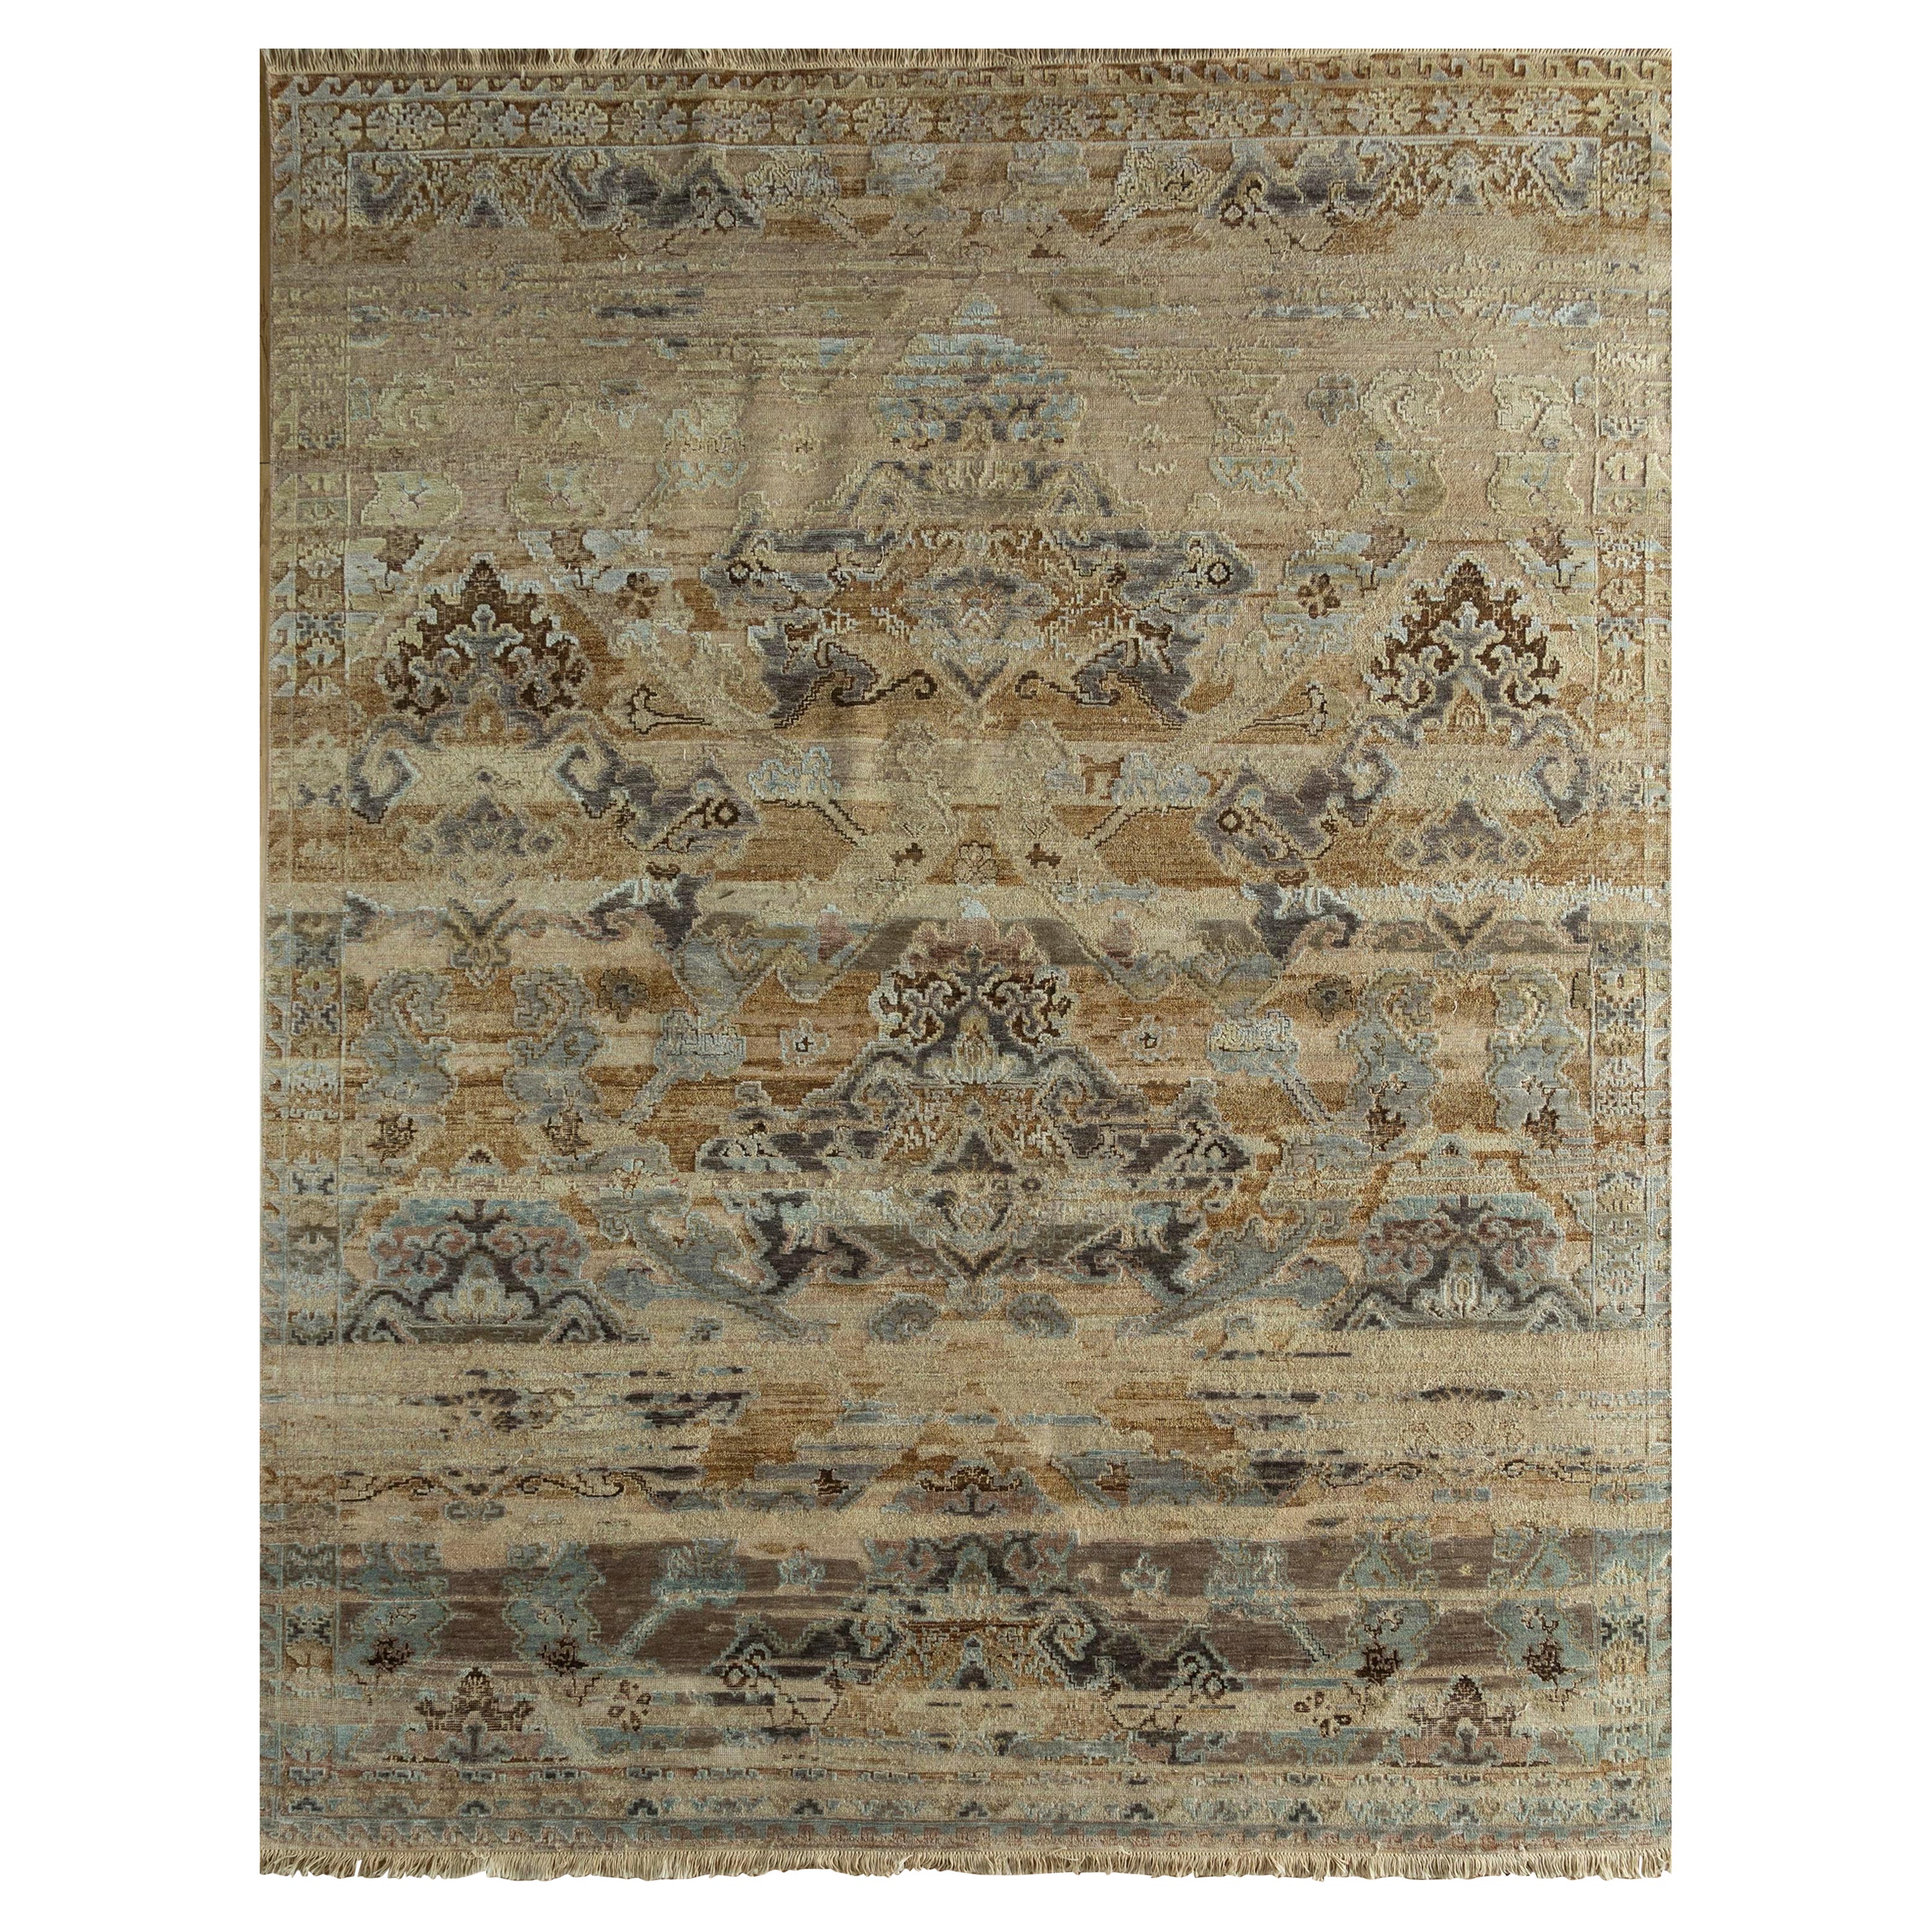 Loomed Legends Soft Beige & Pink Tint 240X300 cm Handknotted Rug For Sale